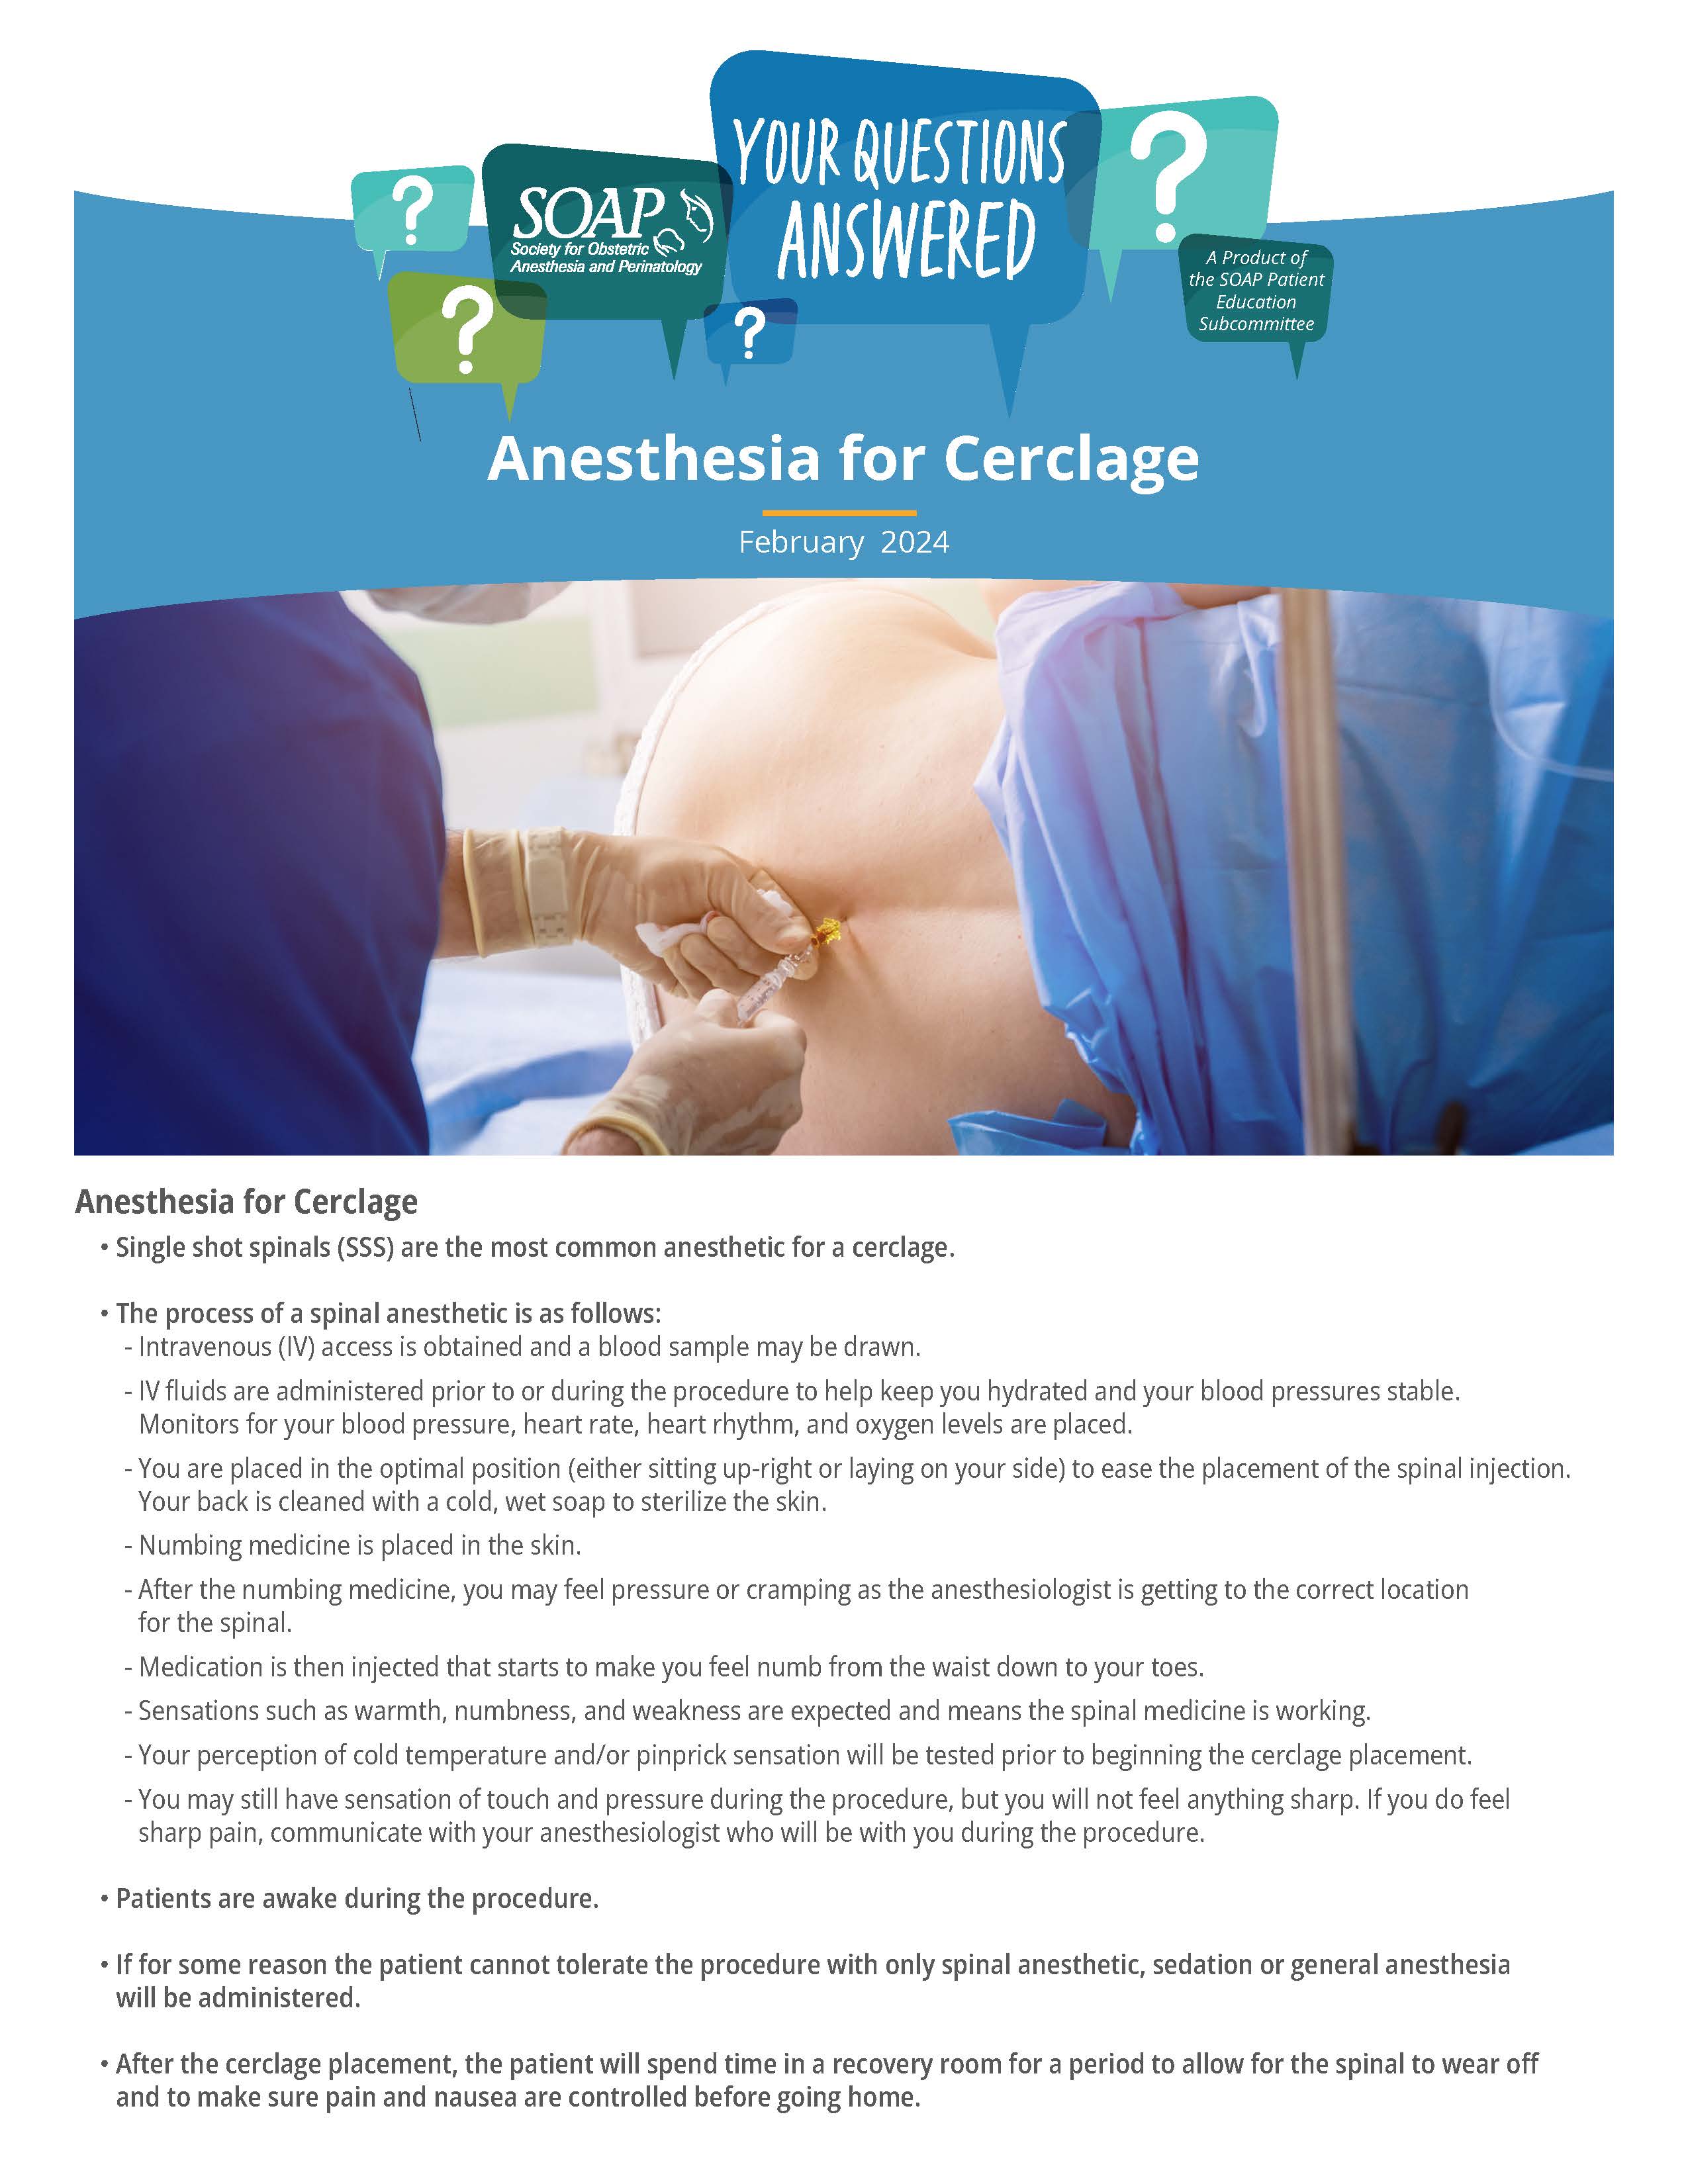 Anesthesia for Cerclage